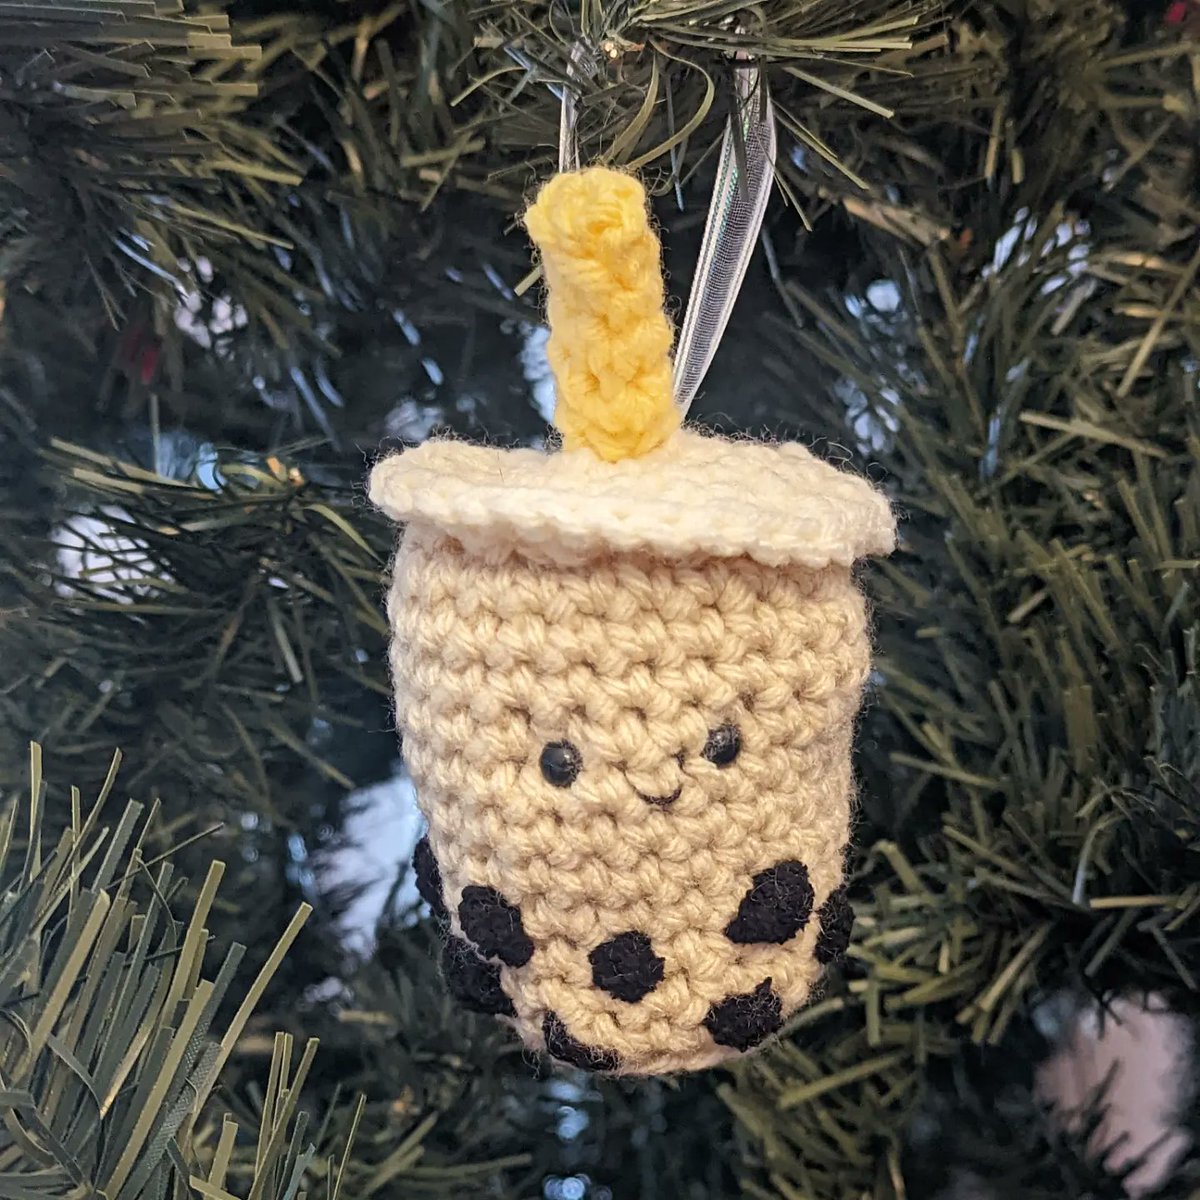 A little bubble tea ornament, just in time for the holidays!

This little buddy is available in milk tea, matcha, strawberry, and taro colours. DM me if you'd like to order one (or more)! 
#yegartist #yegarts #yeglocal #madeinedmonton #crochet #amigurumi #kawaiiamigurumi